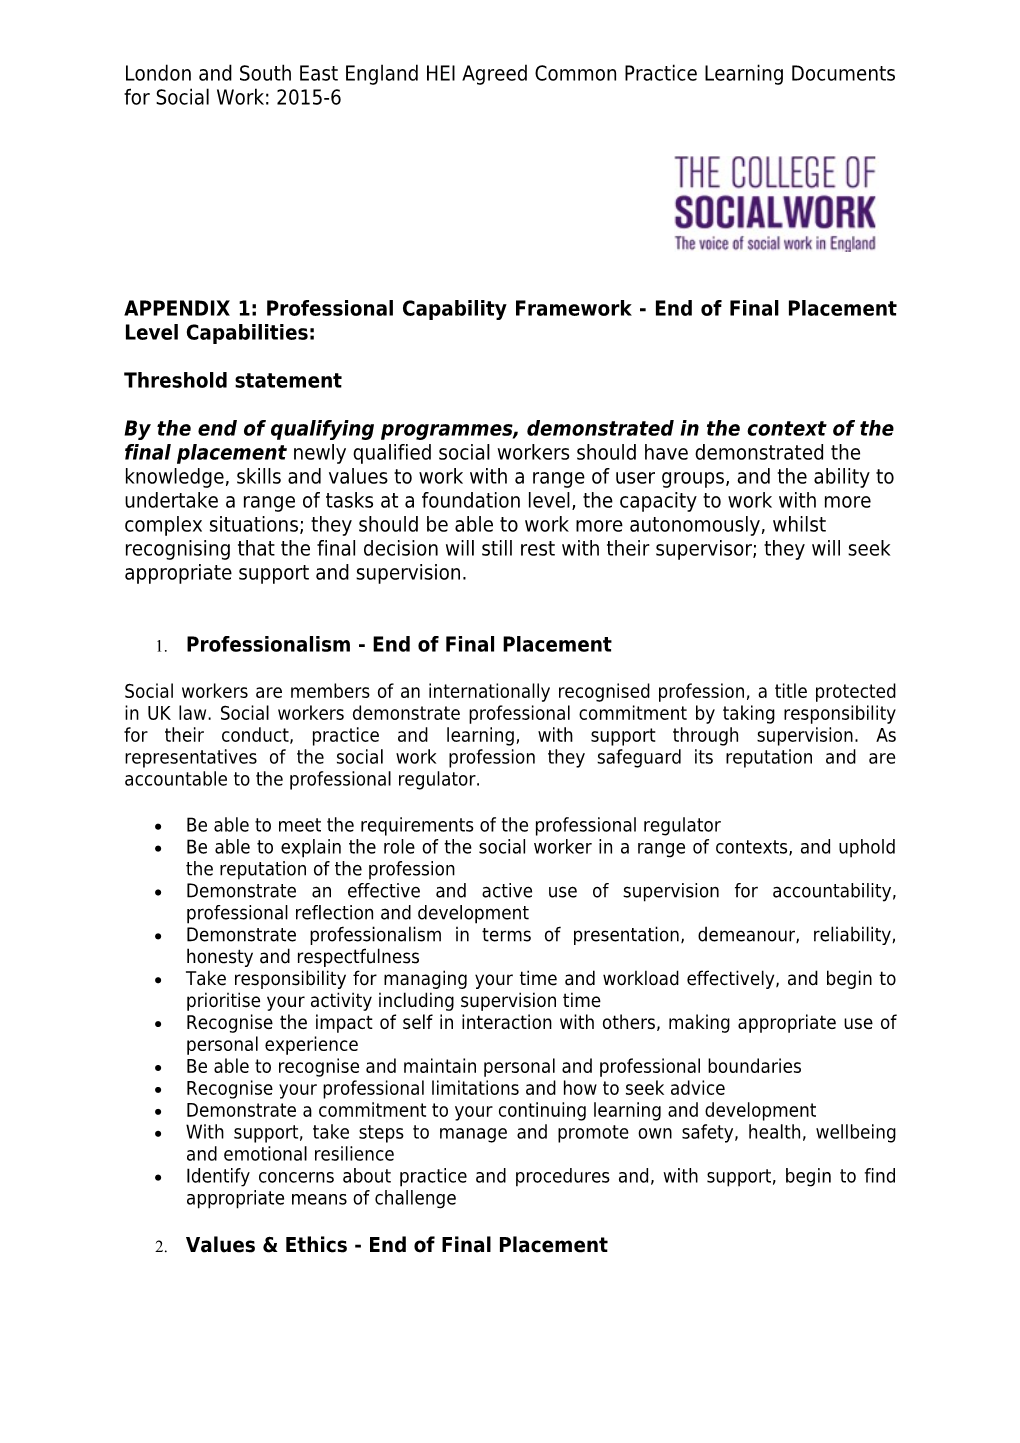 APPENDIX 1: Professional Capability Framework - End of Final Placement Level Capabilities